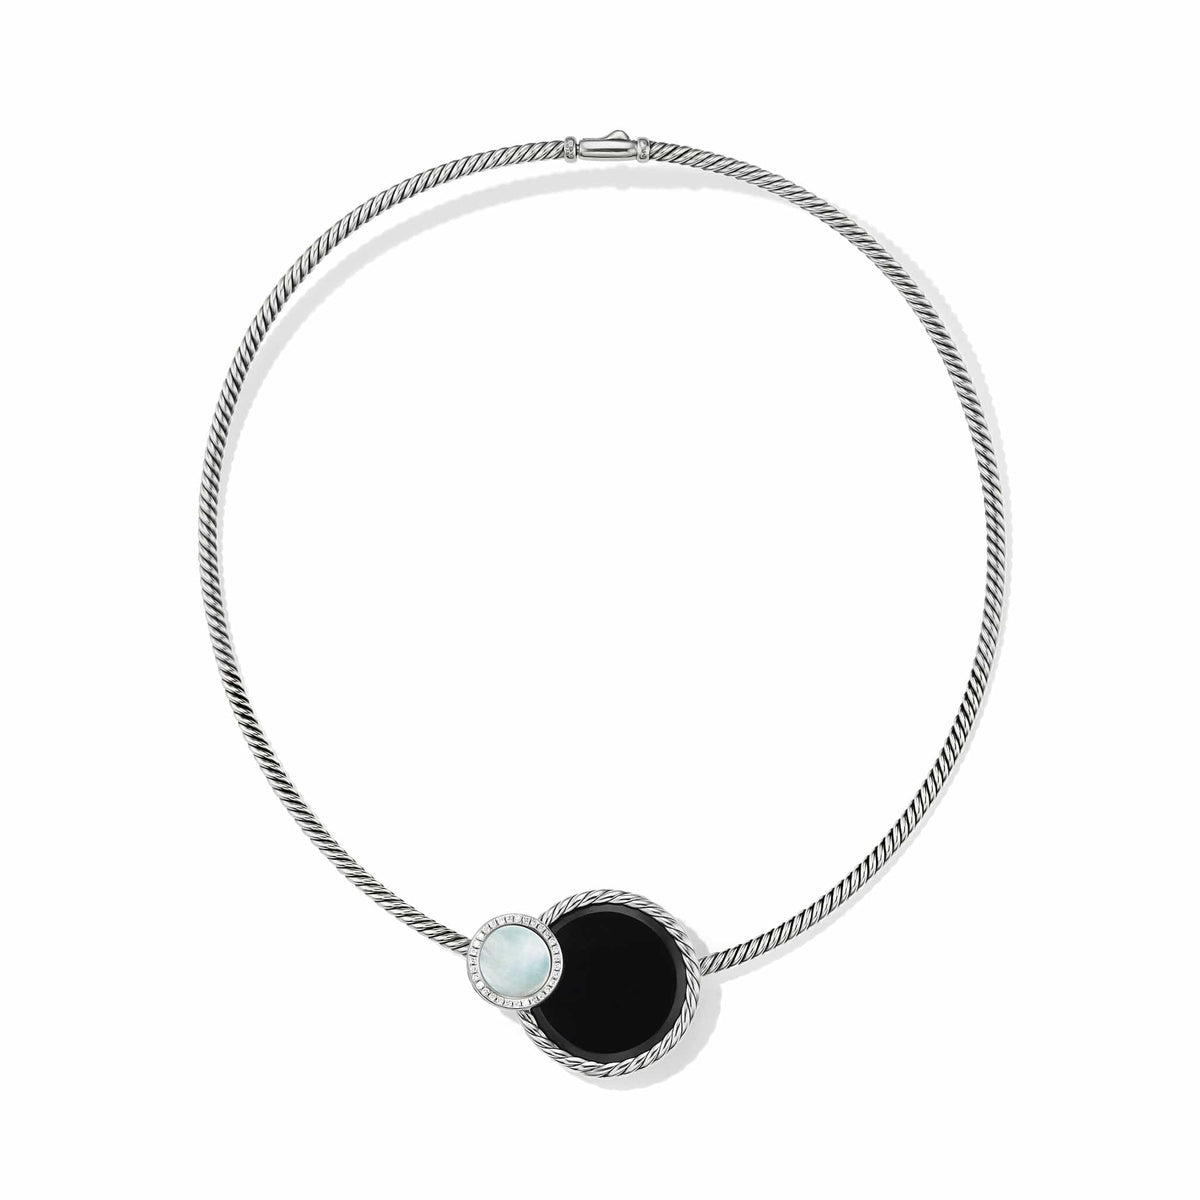 DY Elements® Eclipse Necklace with Black Onyx, Mother of Pearl and Pavé Diamonds, Long's Jewelers